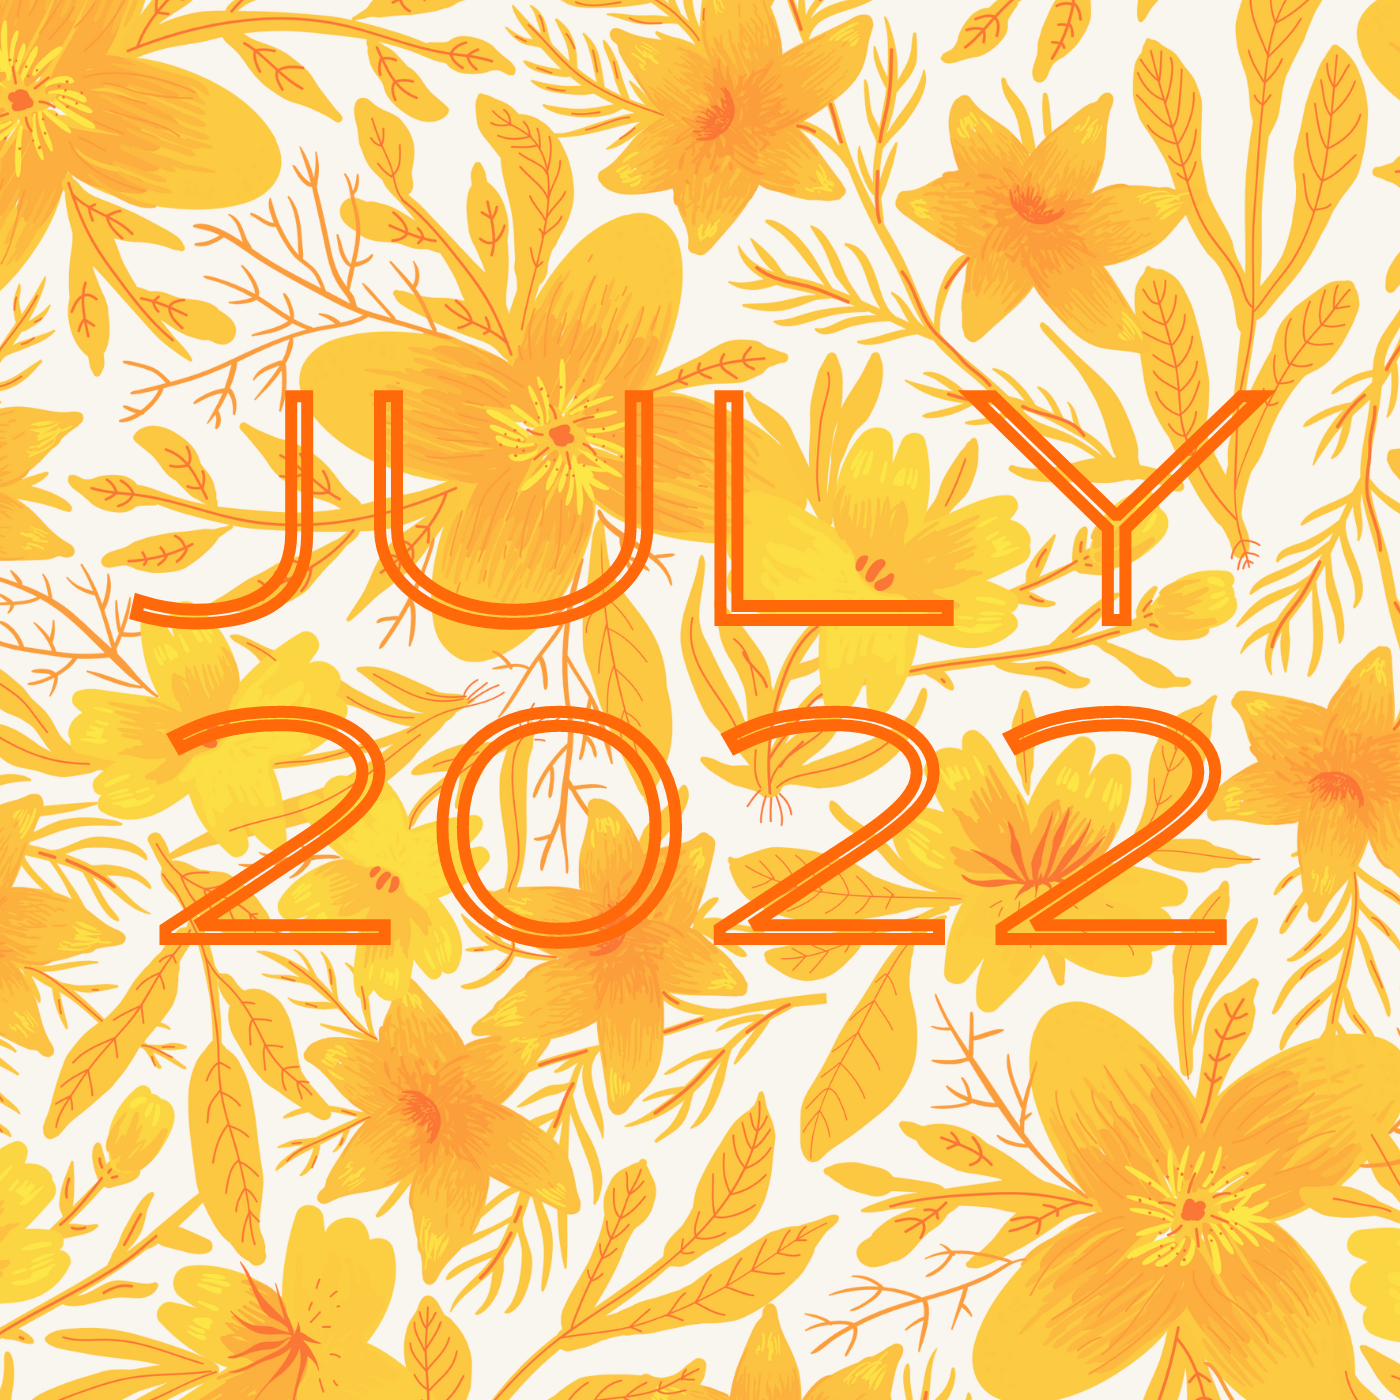 an orange and yellow illustration of flowers with july 2022 in a sans-serif font at the center